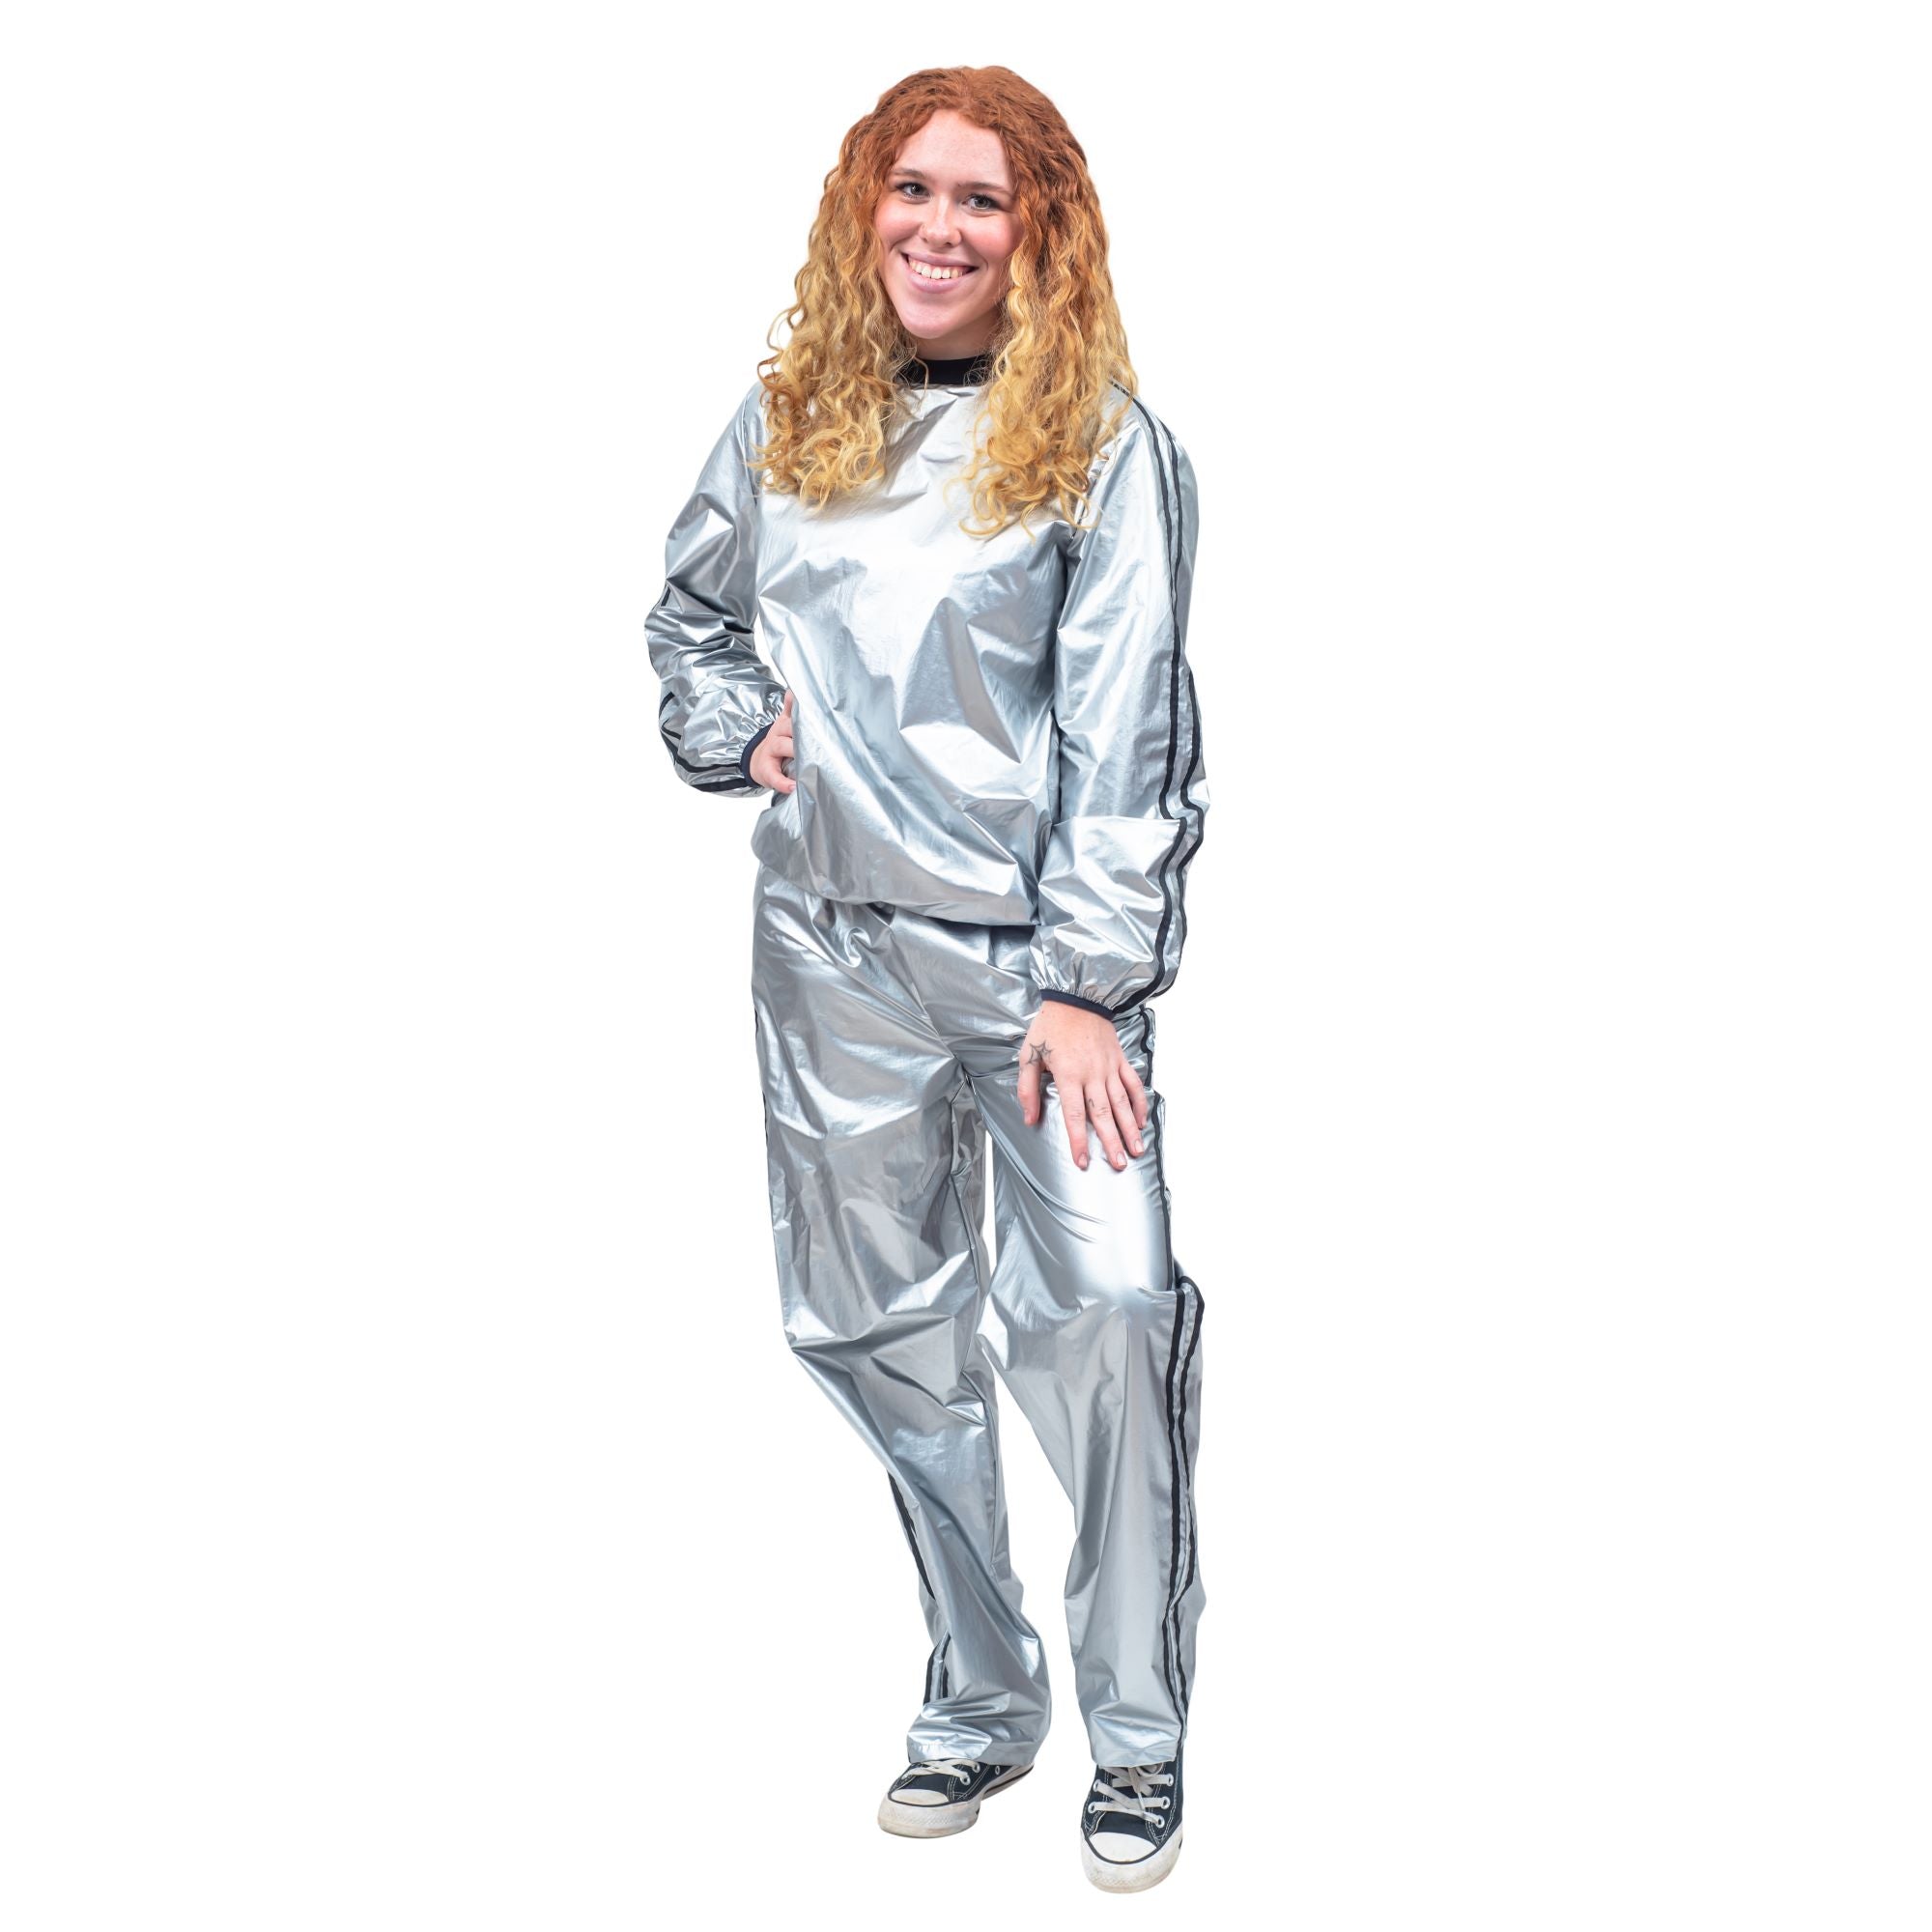 Todd & Margo Shiny Silver Workout Top and Pants